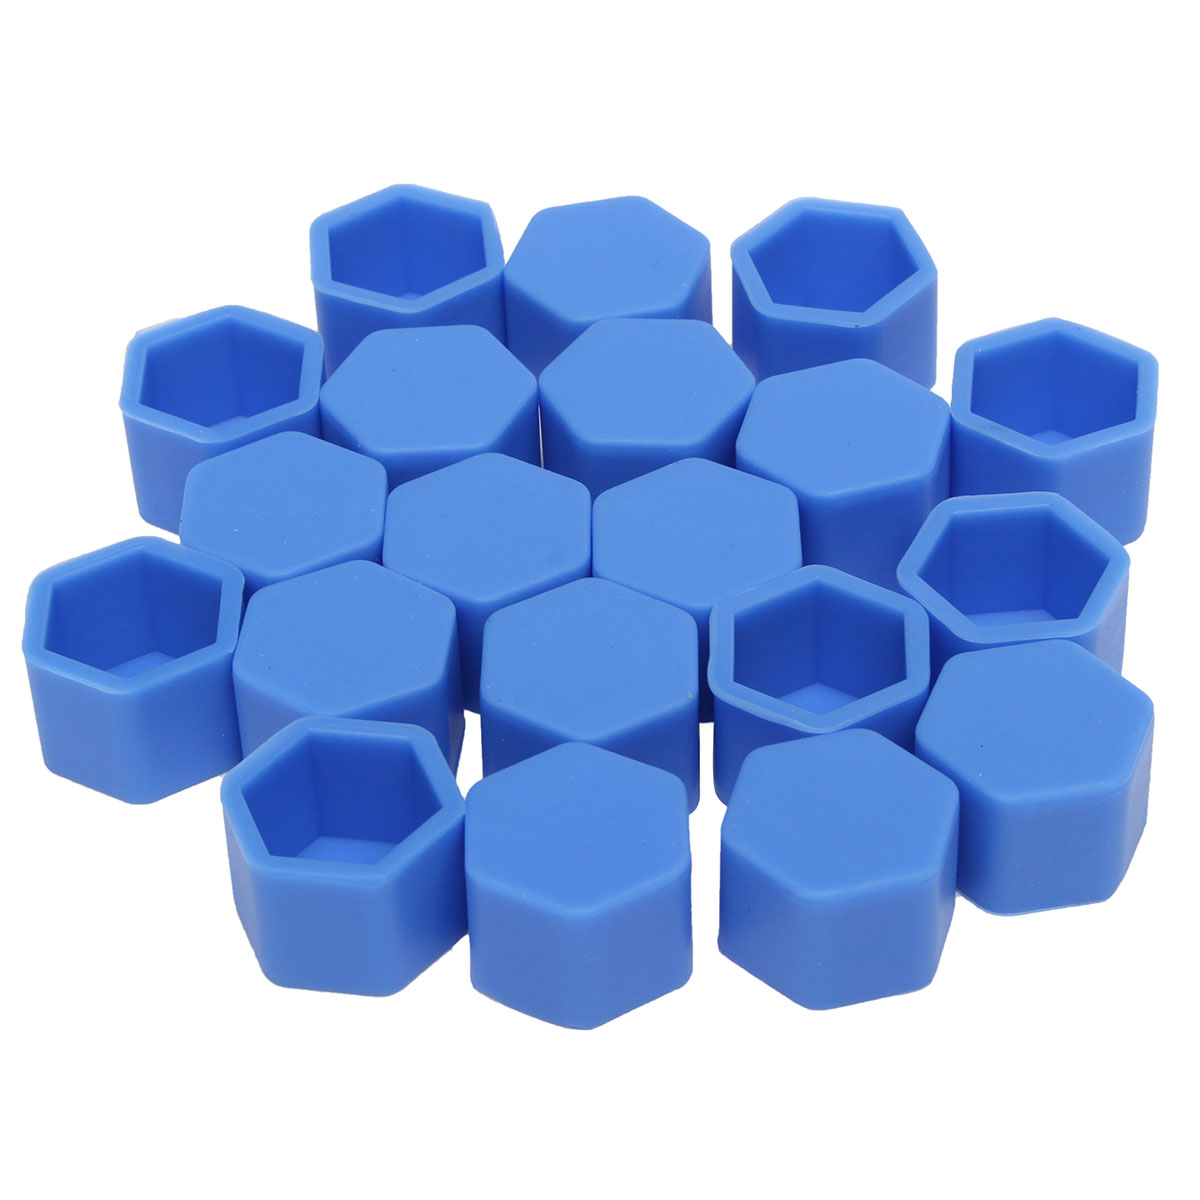 20PCS-19mm-Auto-Car-Silicone-Wheel-Nuts-Hub-Covers-Screw-Dust-Protective-Caps-1070127